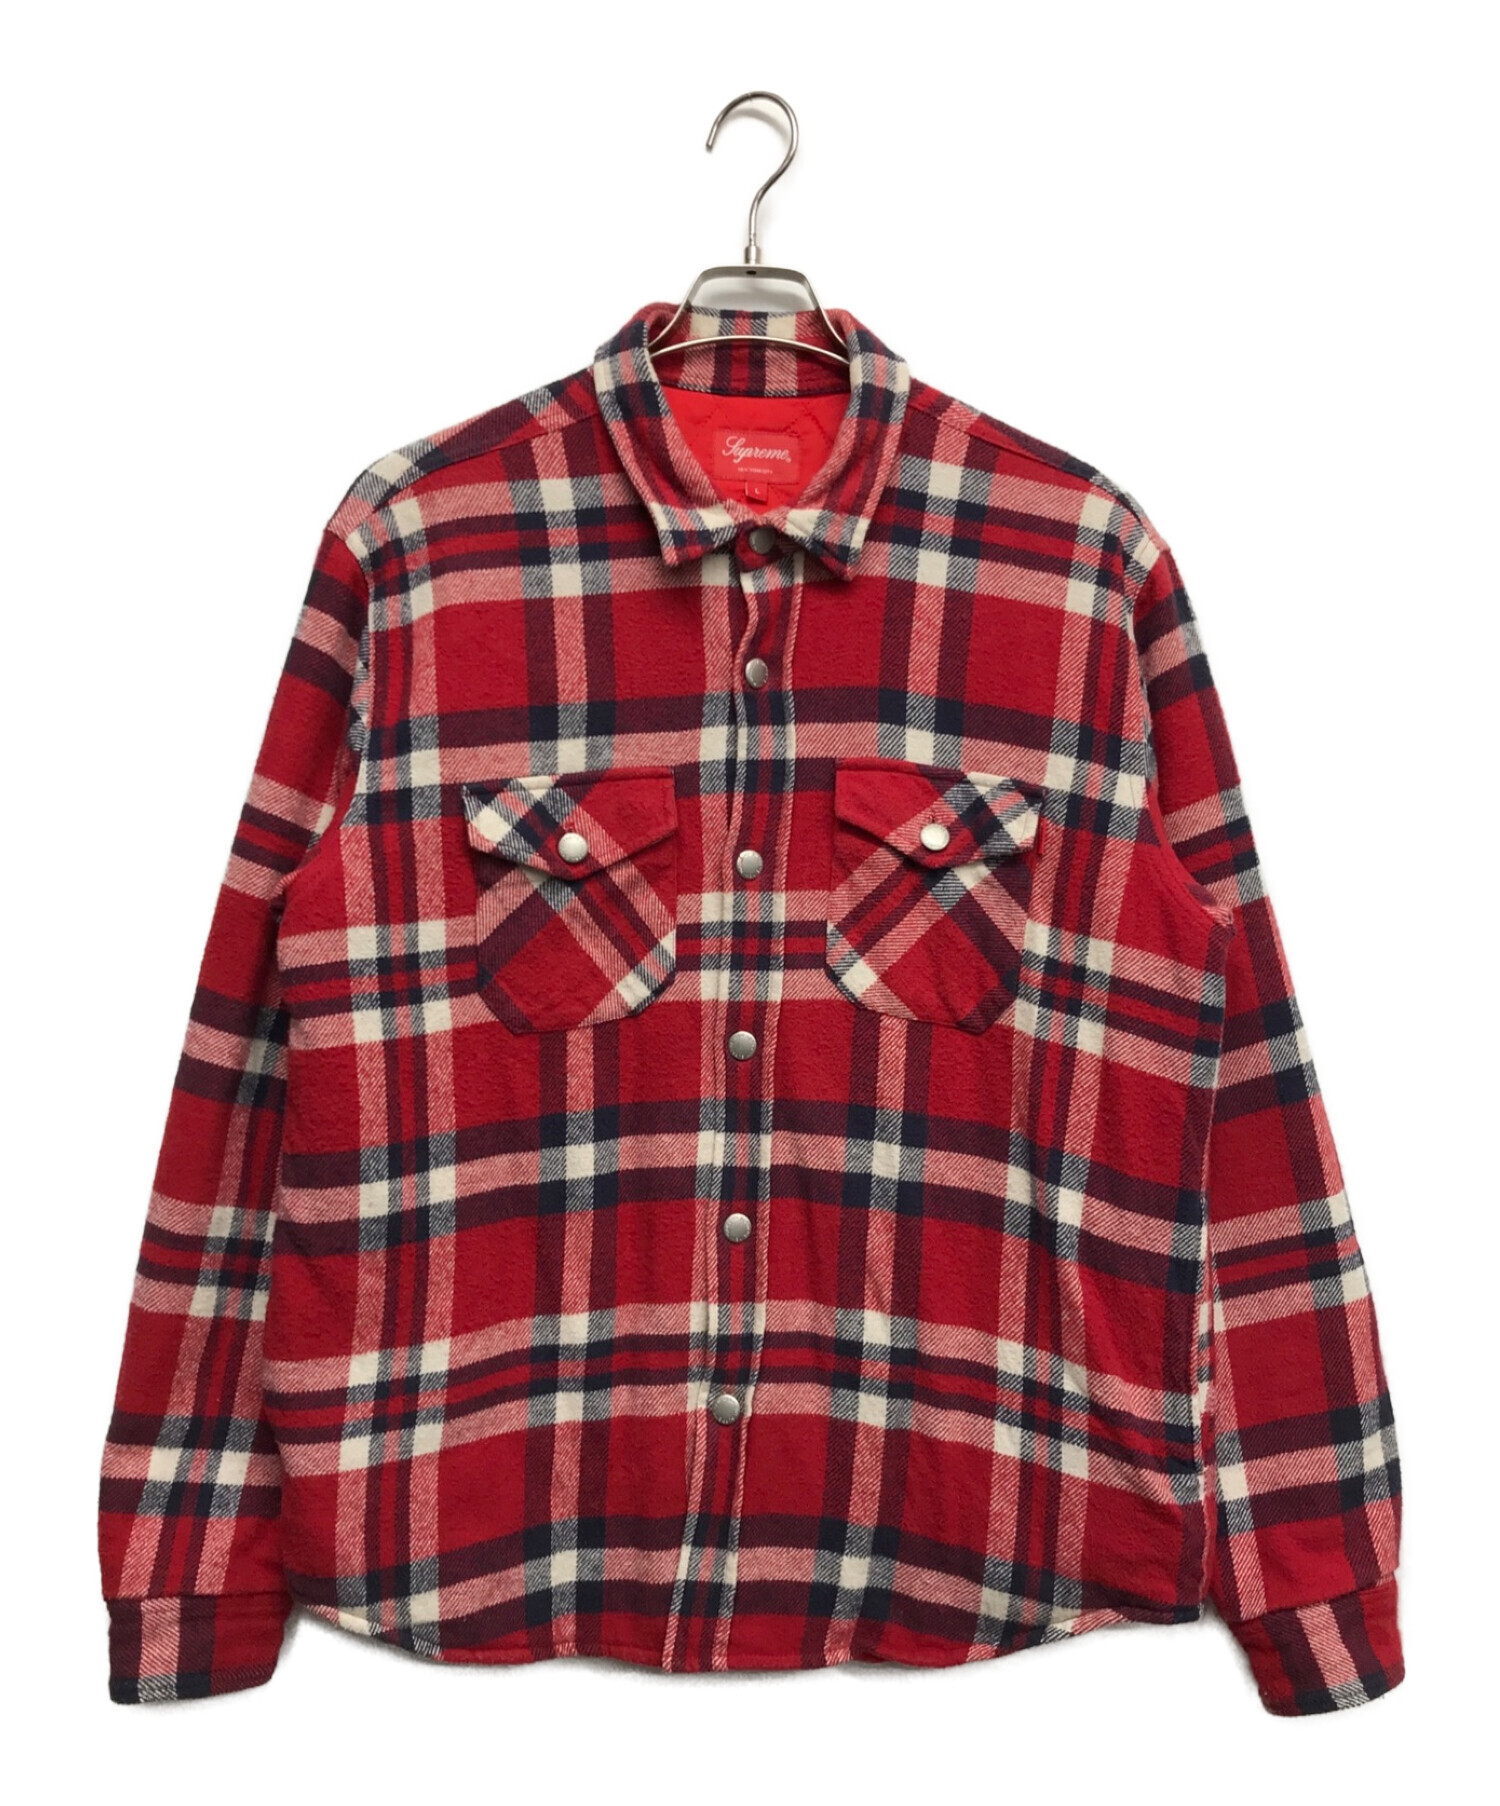 Supreme (シュプリーム) Quilted Flannel Shirt レッド サイズ:L